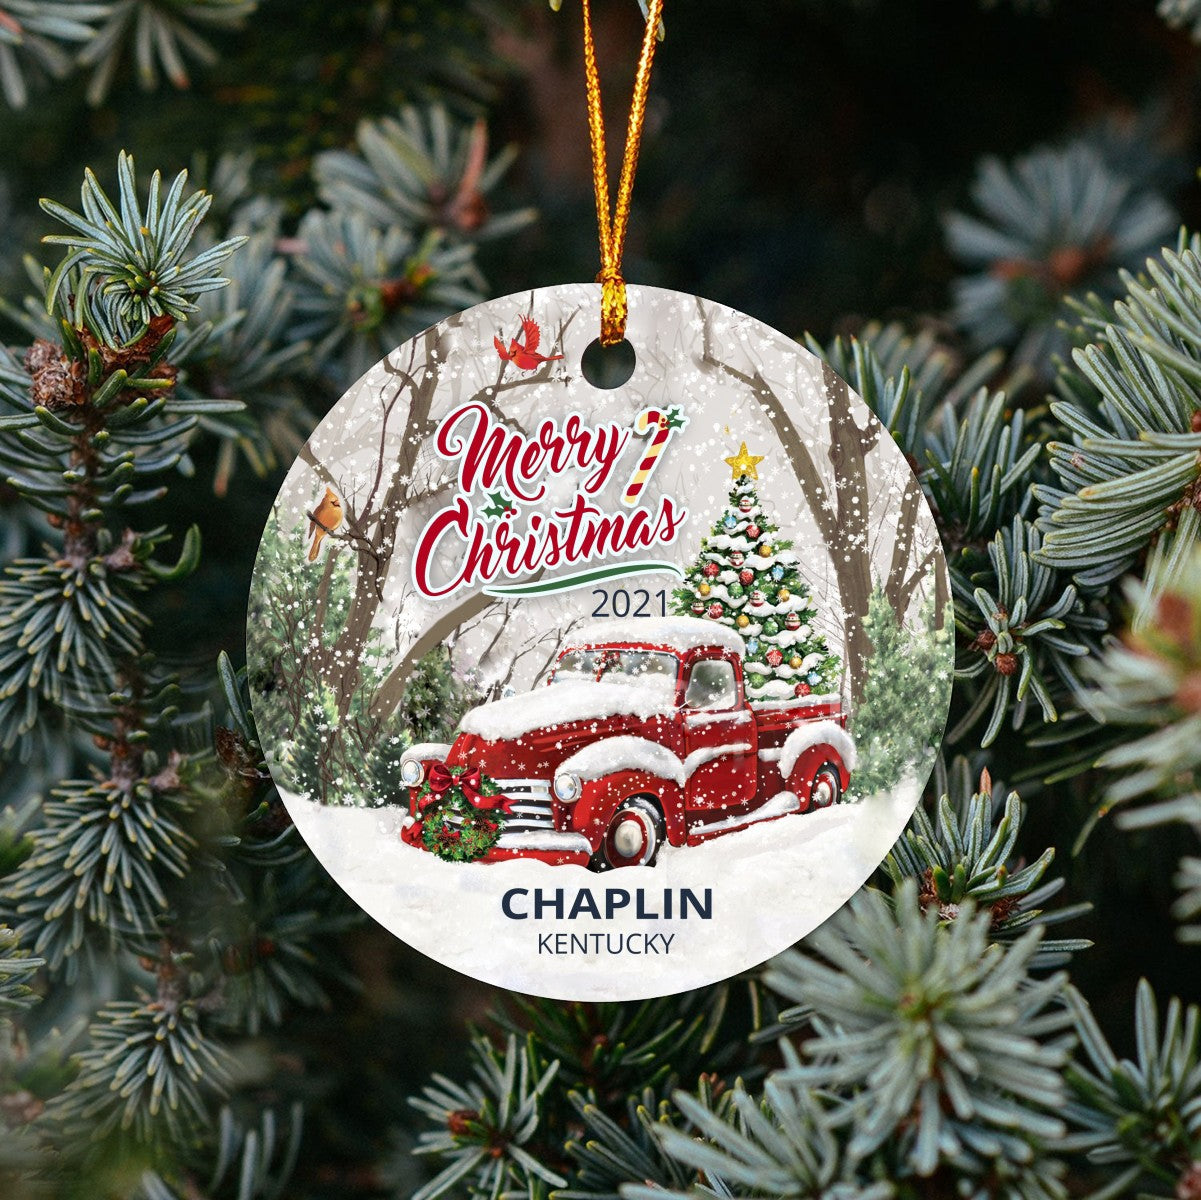 Christmas Tree Ornaments Chaplin - Ornament Customize With Name City And State Chaplin Kentucky KY - Red Truck Xmas Ornaments 3'' Plastic Gift For Family, Friend And Housewarming